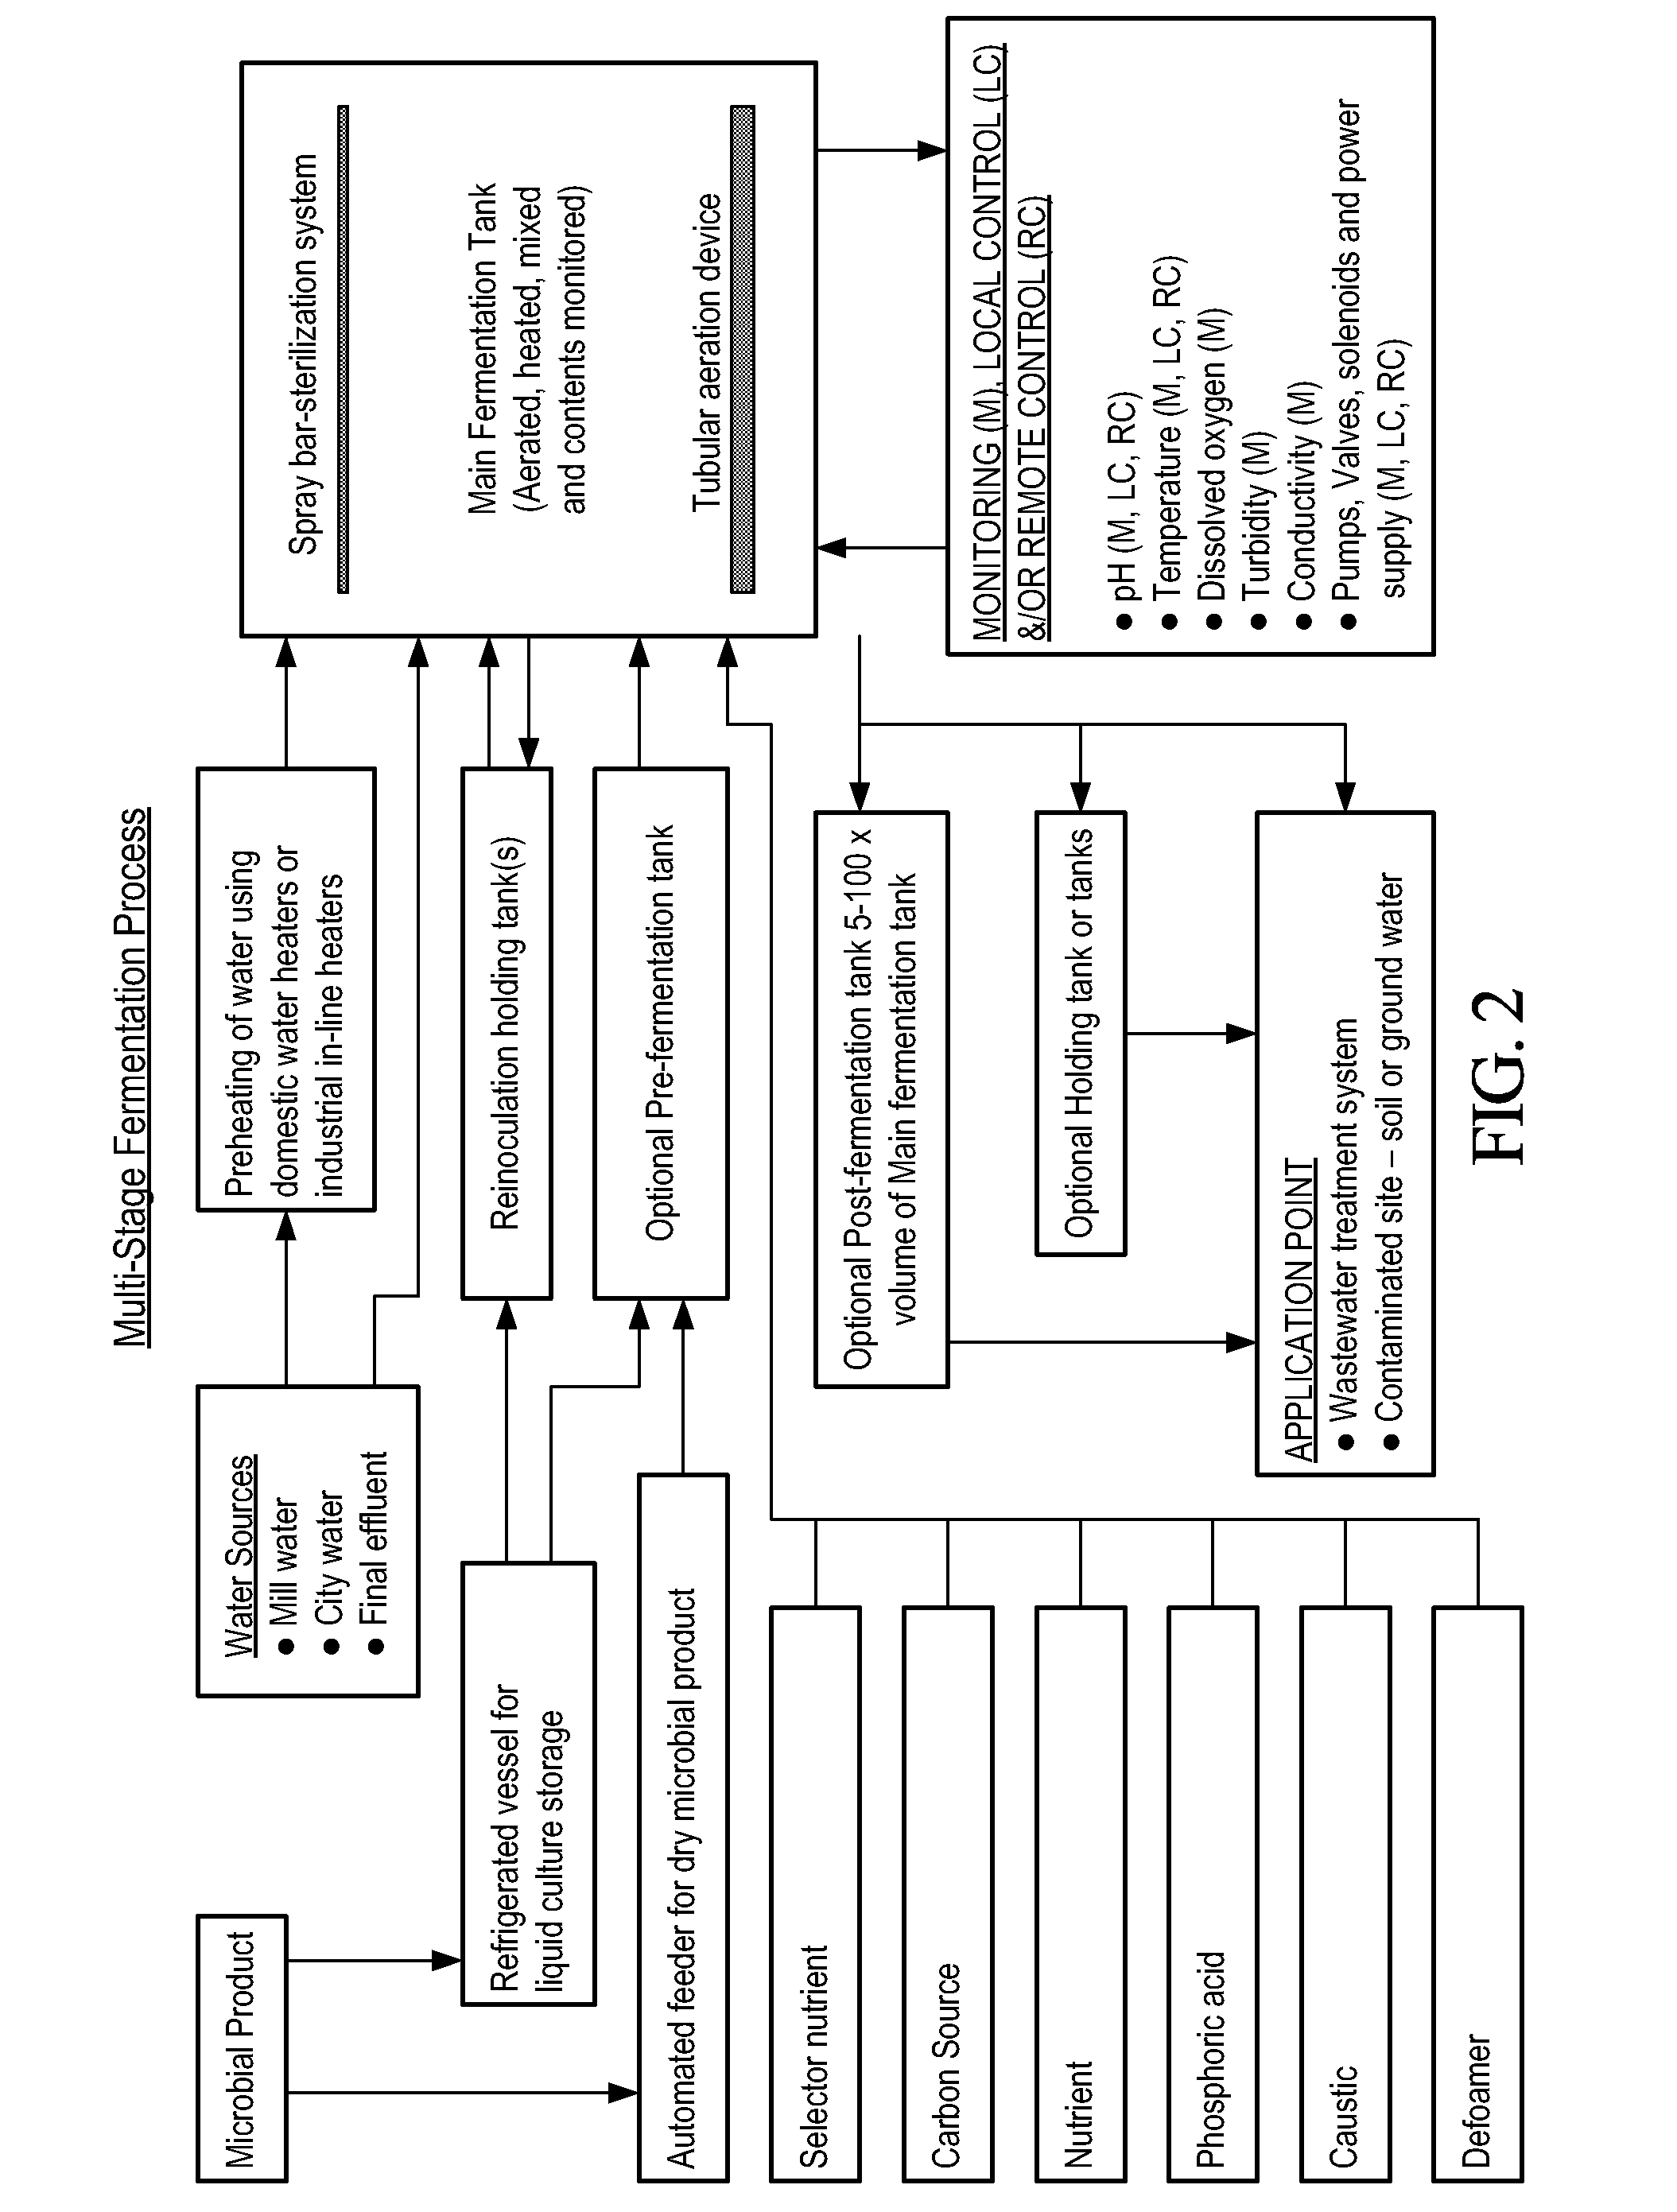 Methods and kits for bioremediation of contaminated soil